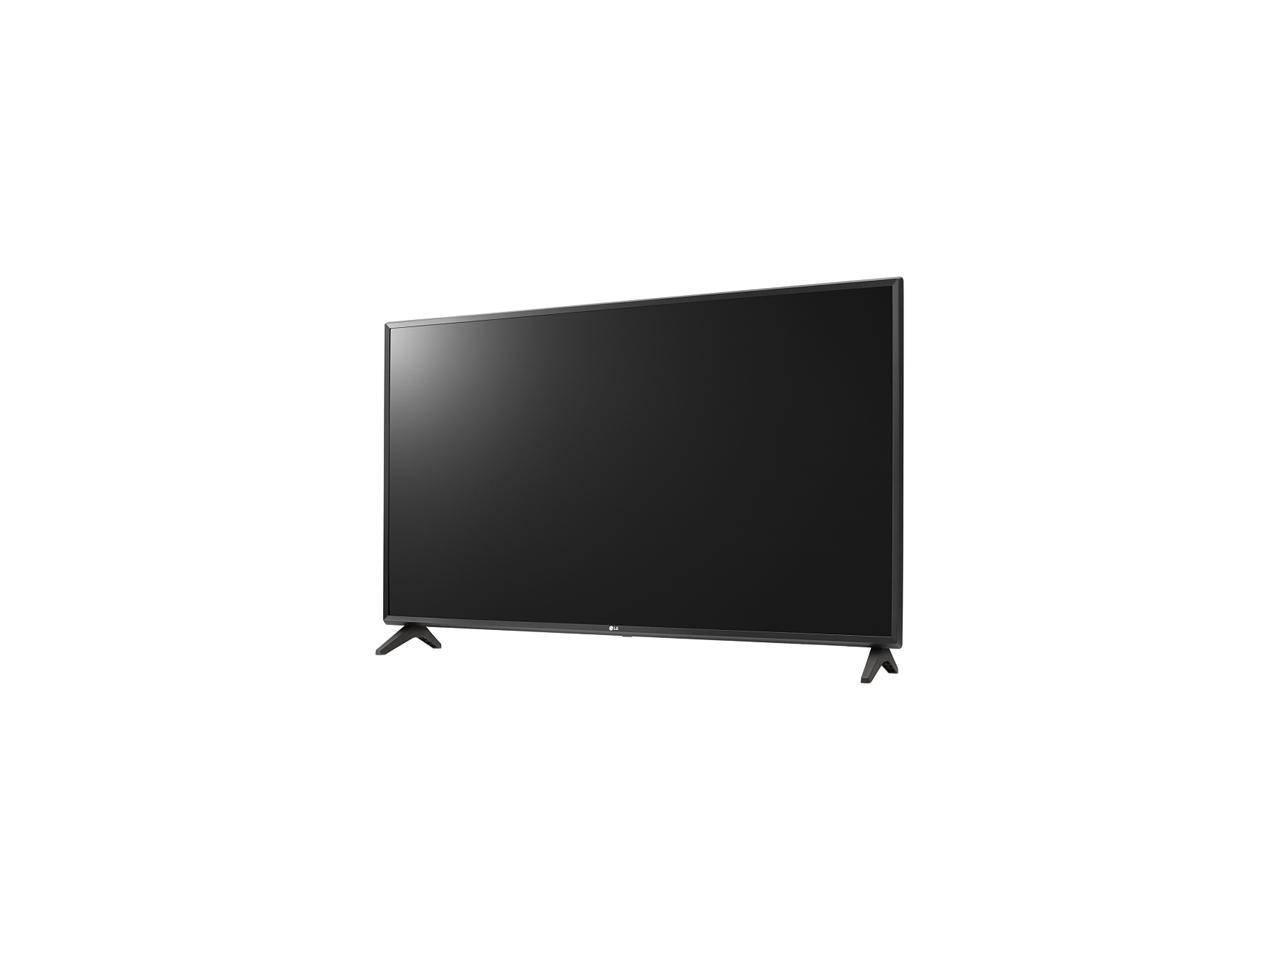 LG 32LT340C0UB 32" HD Commercial TV, HDMI, 1 RS232, USB, Speaker, Stand, Viewing Angle 178°/178° NTSC, Creston Connected, Full IP Control and WOL(Wake-on LAN)